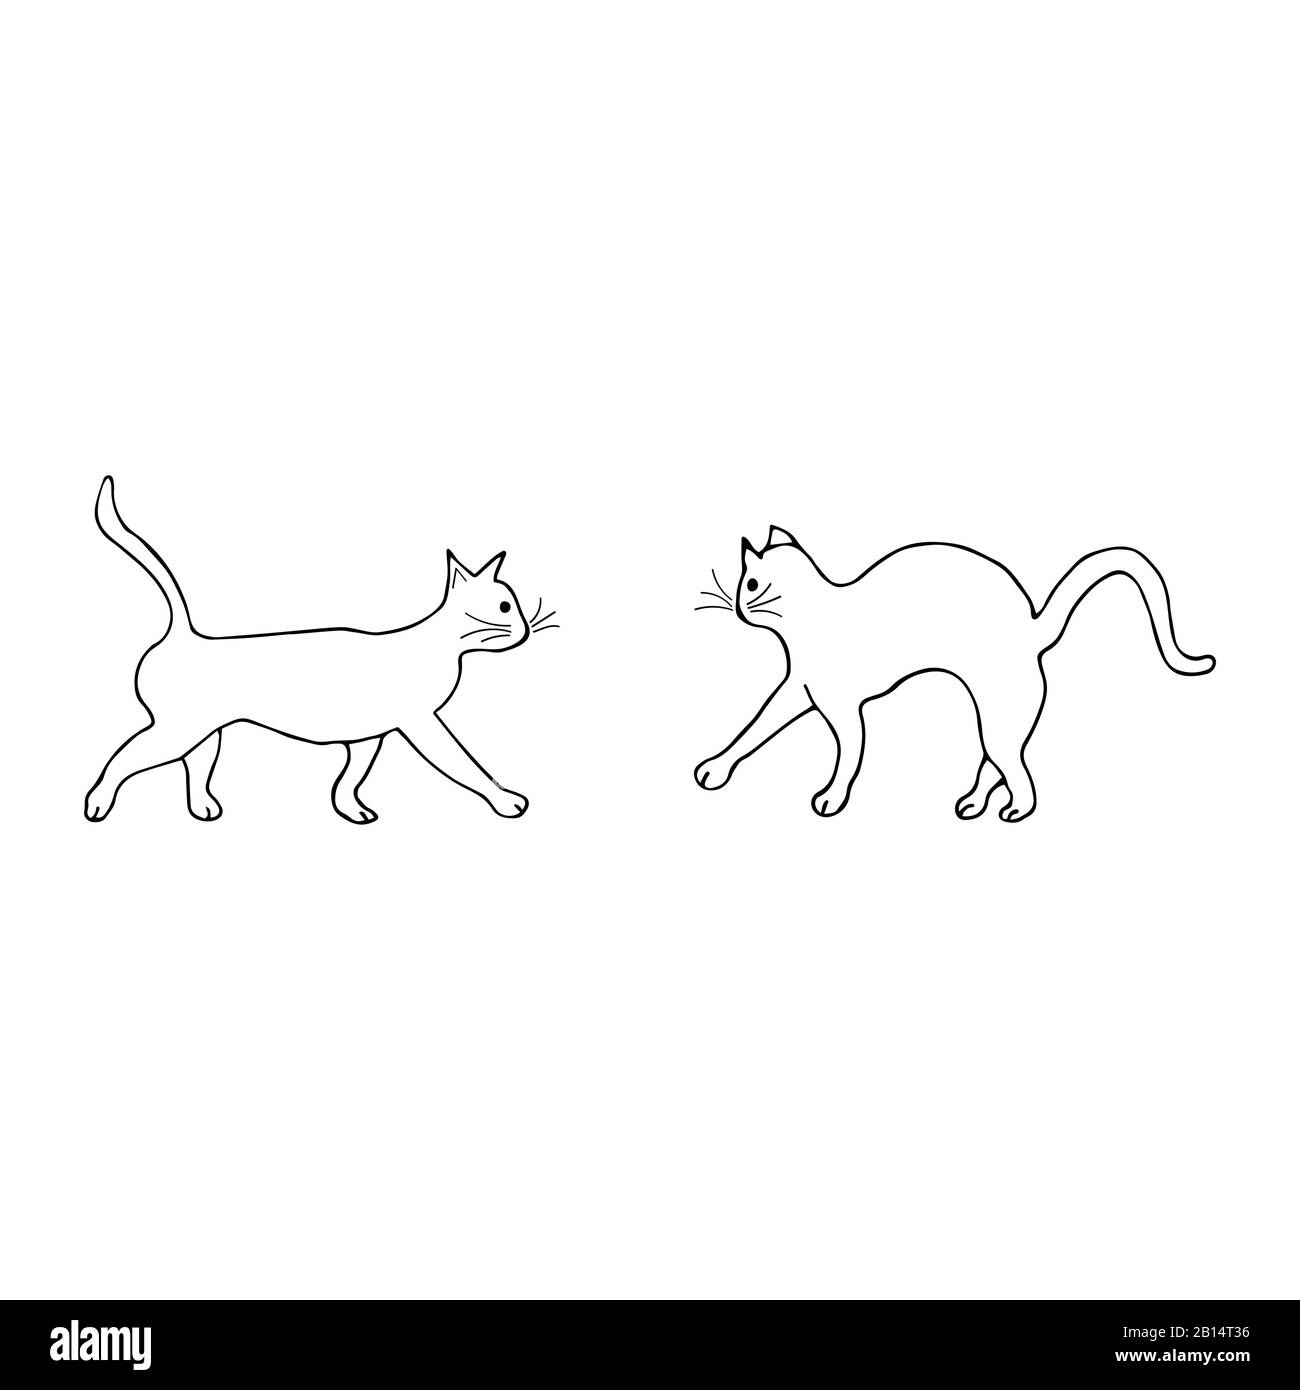 Two cats go towards each other, one arched its back and wary. Doodle black and white illustration on white background. Cute animals Stock Vector